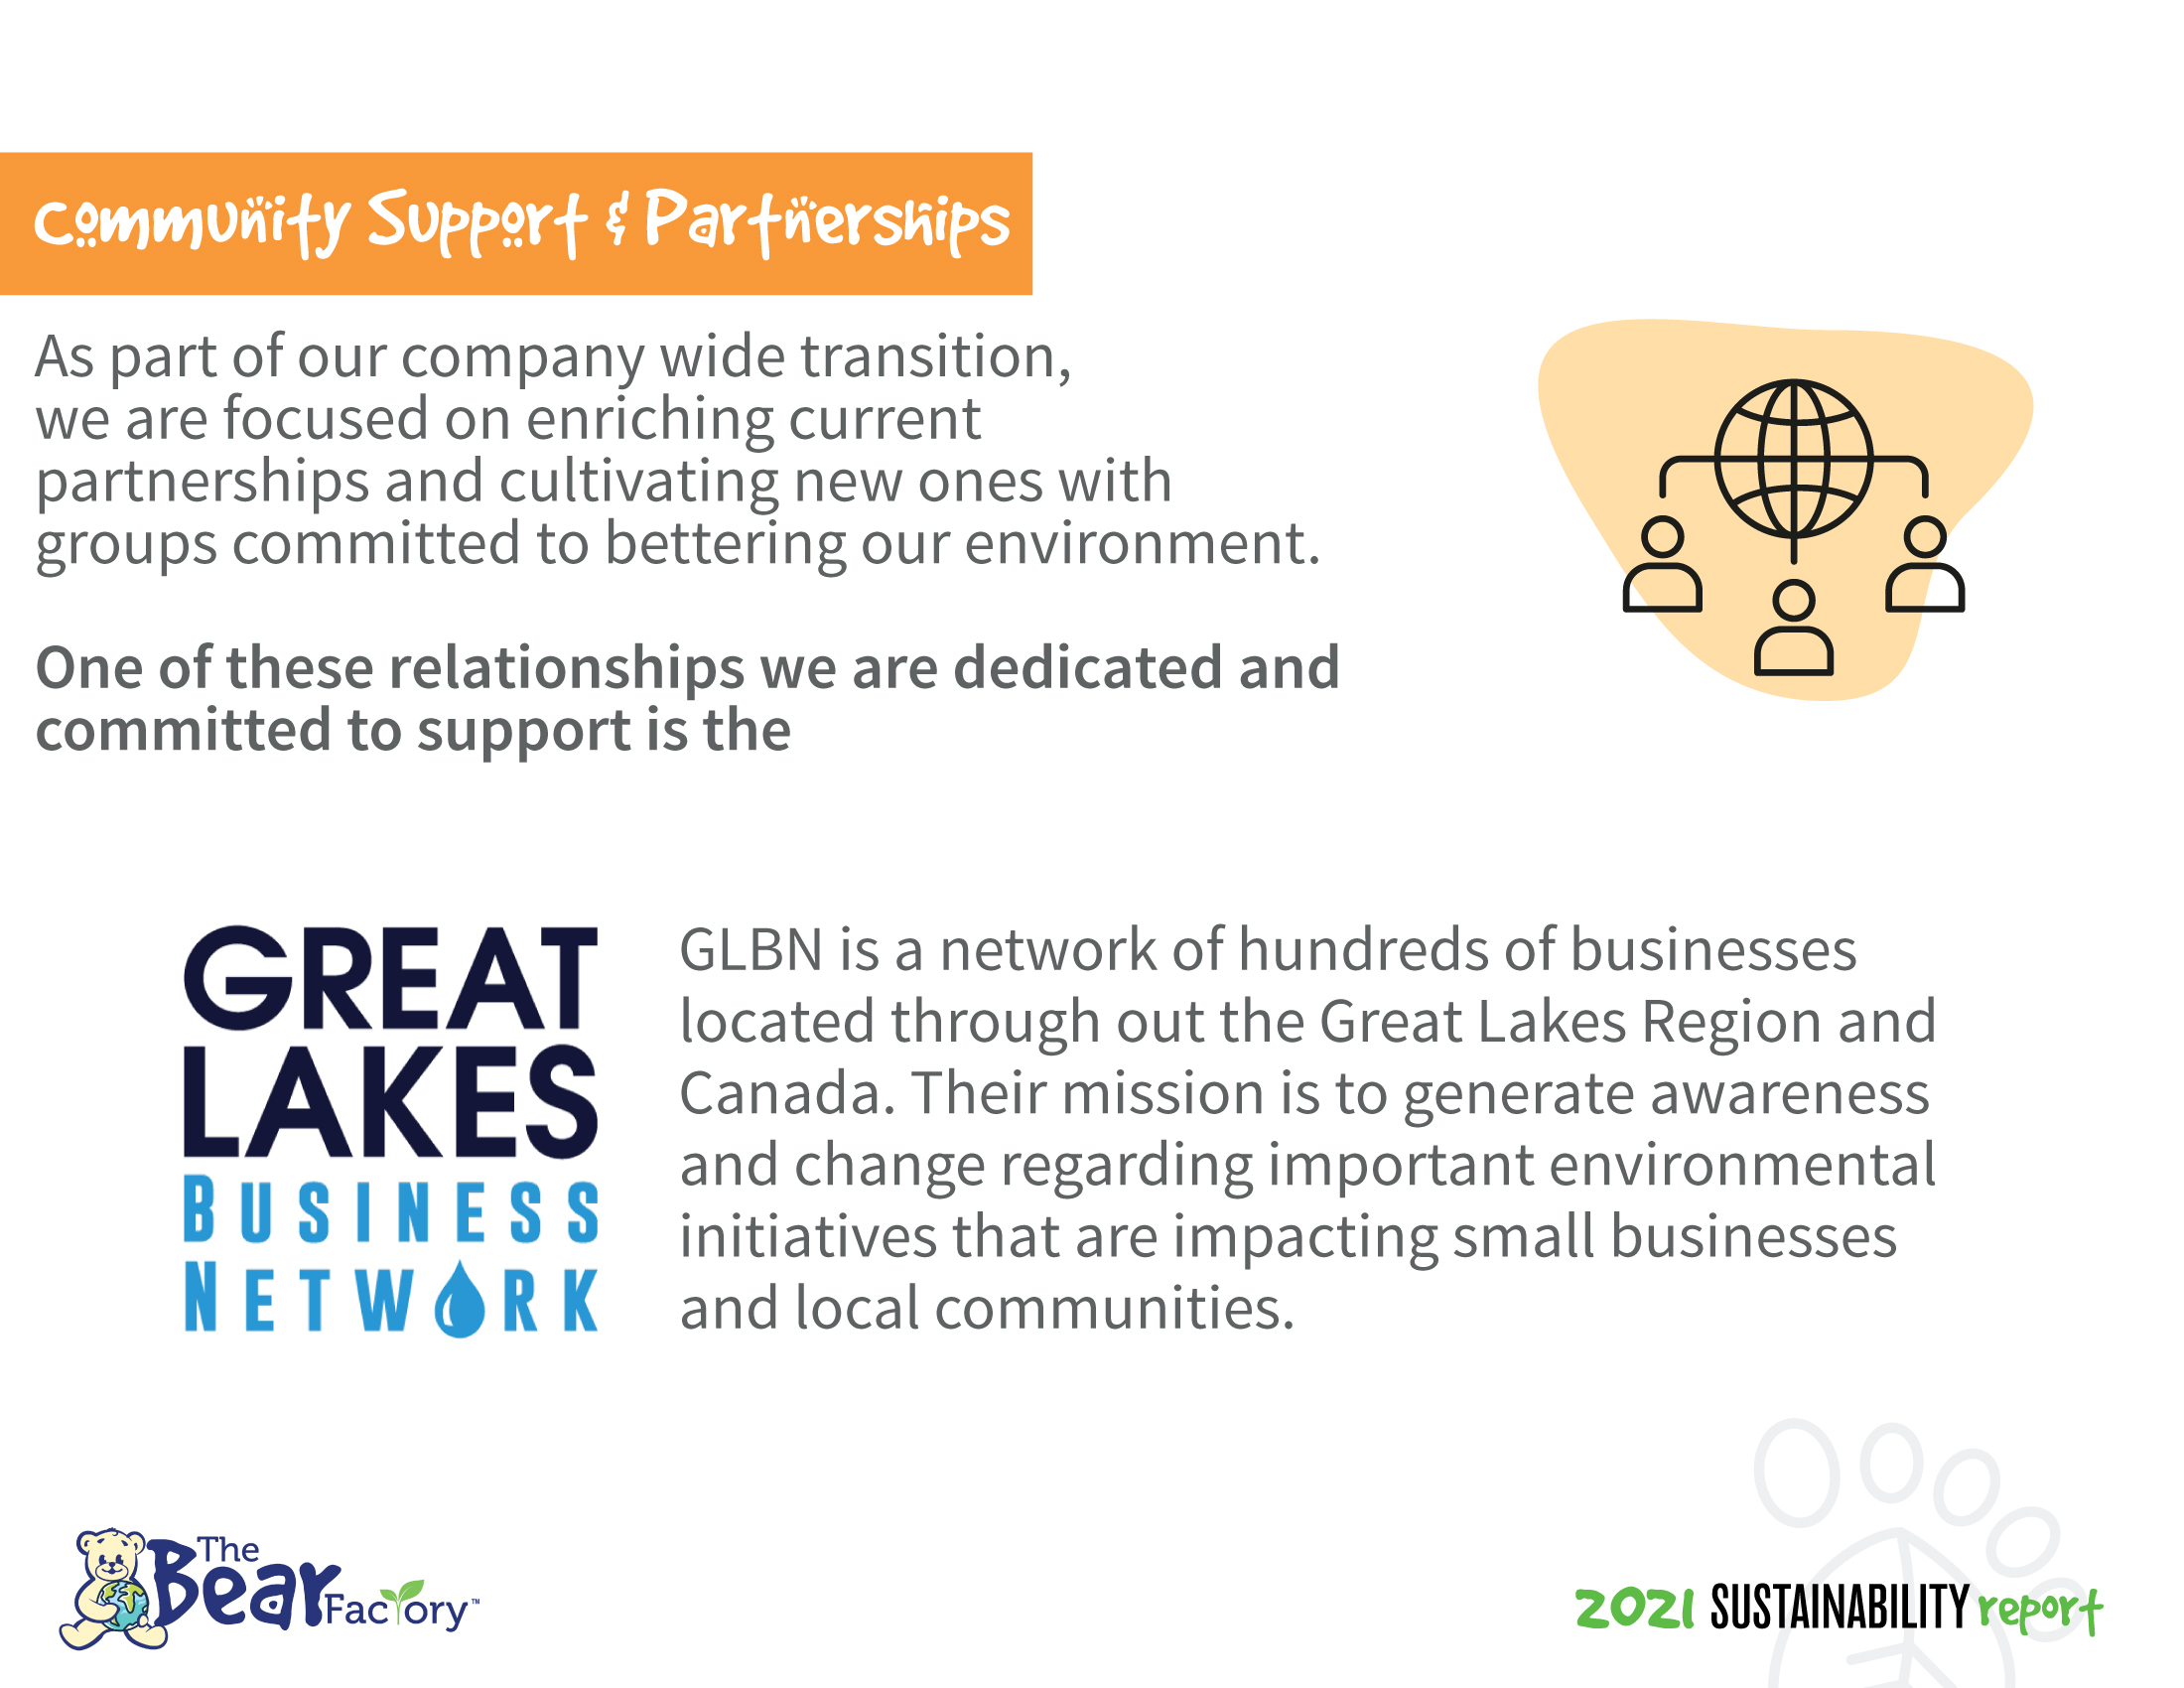 As part of our company wide transition, we are focused on enriching current partnerships and cultivating new ones with groups committed to bettering our environment. One of these relationships we are dedicated and committed to support is the Great Lakes Business Network.GLBNis a network ofhundreds of businesses located through out the Great Lakes Region and LAKES Canada. Their mission is to generate awareness and change regarding important environmental BUSINESS initiatives that are impacting small businesses NETWORK and local communities.